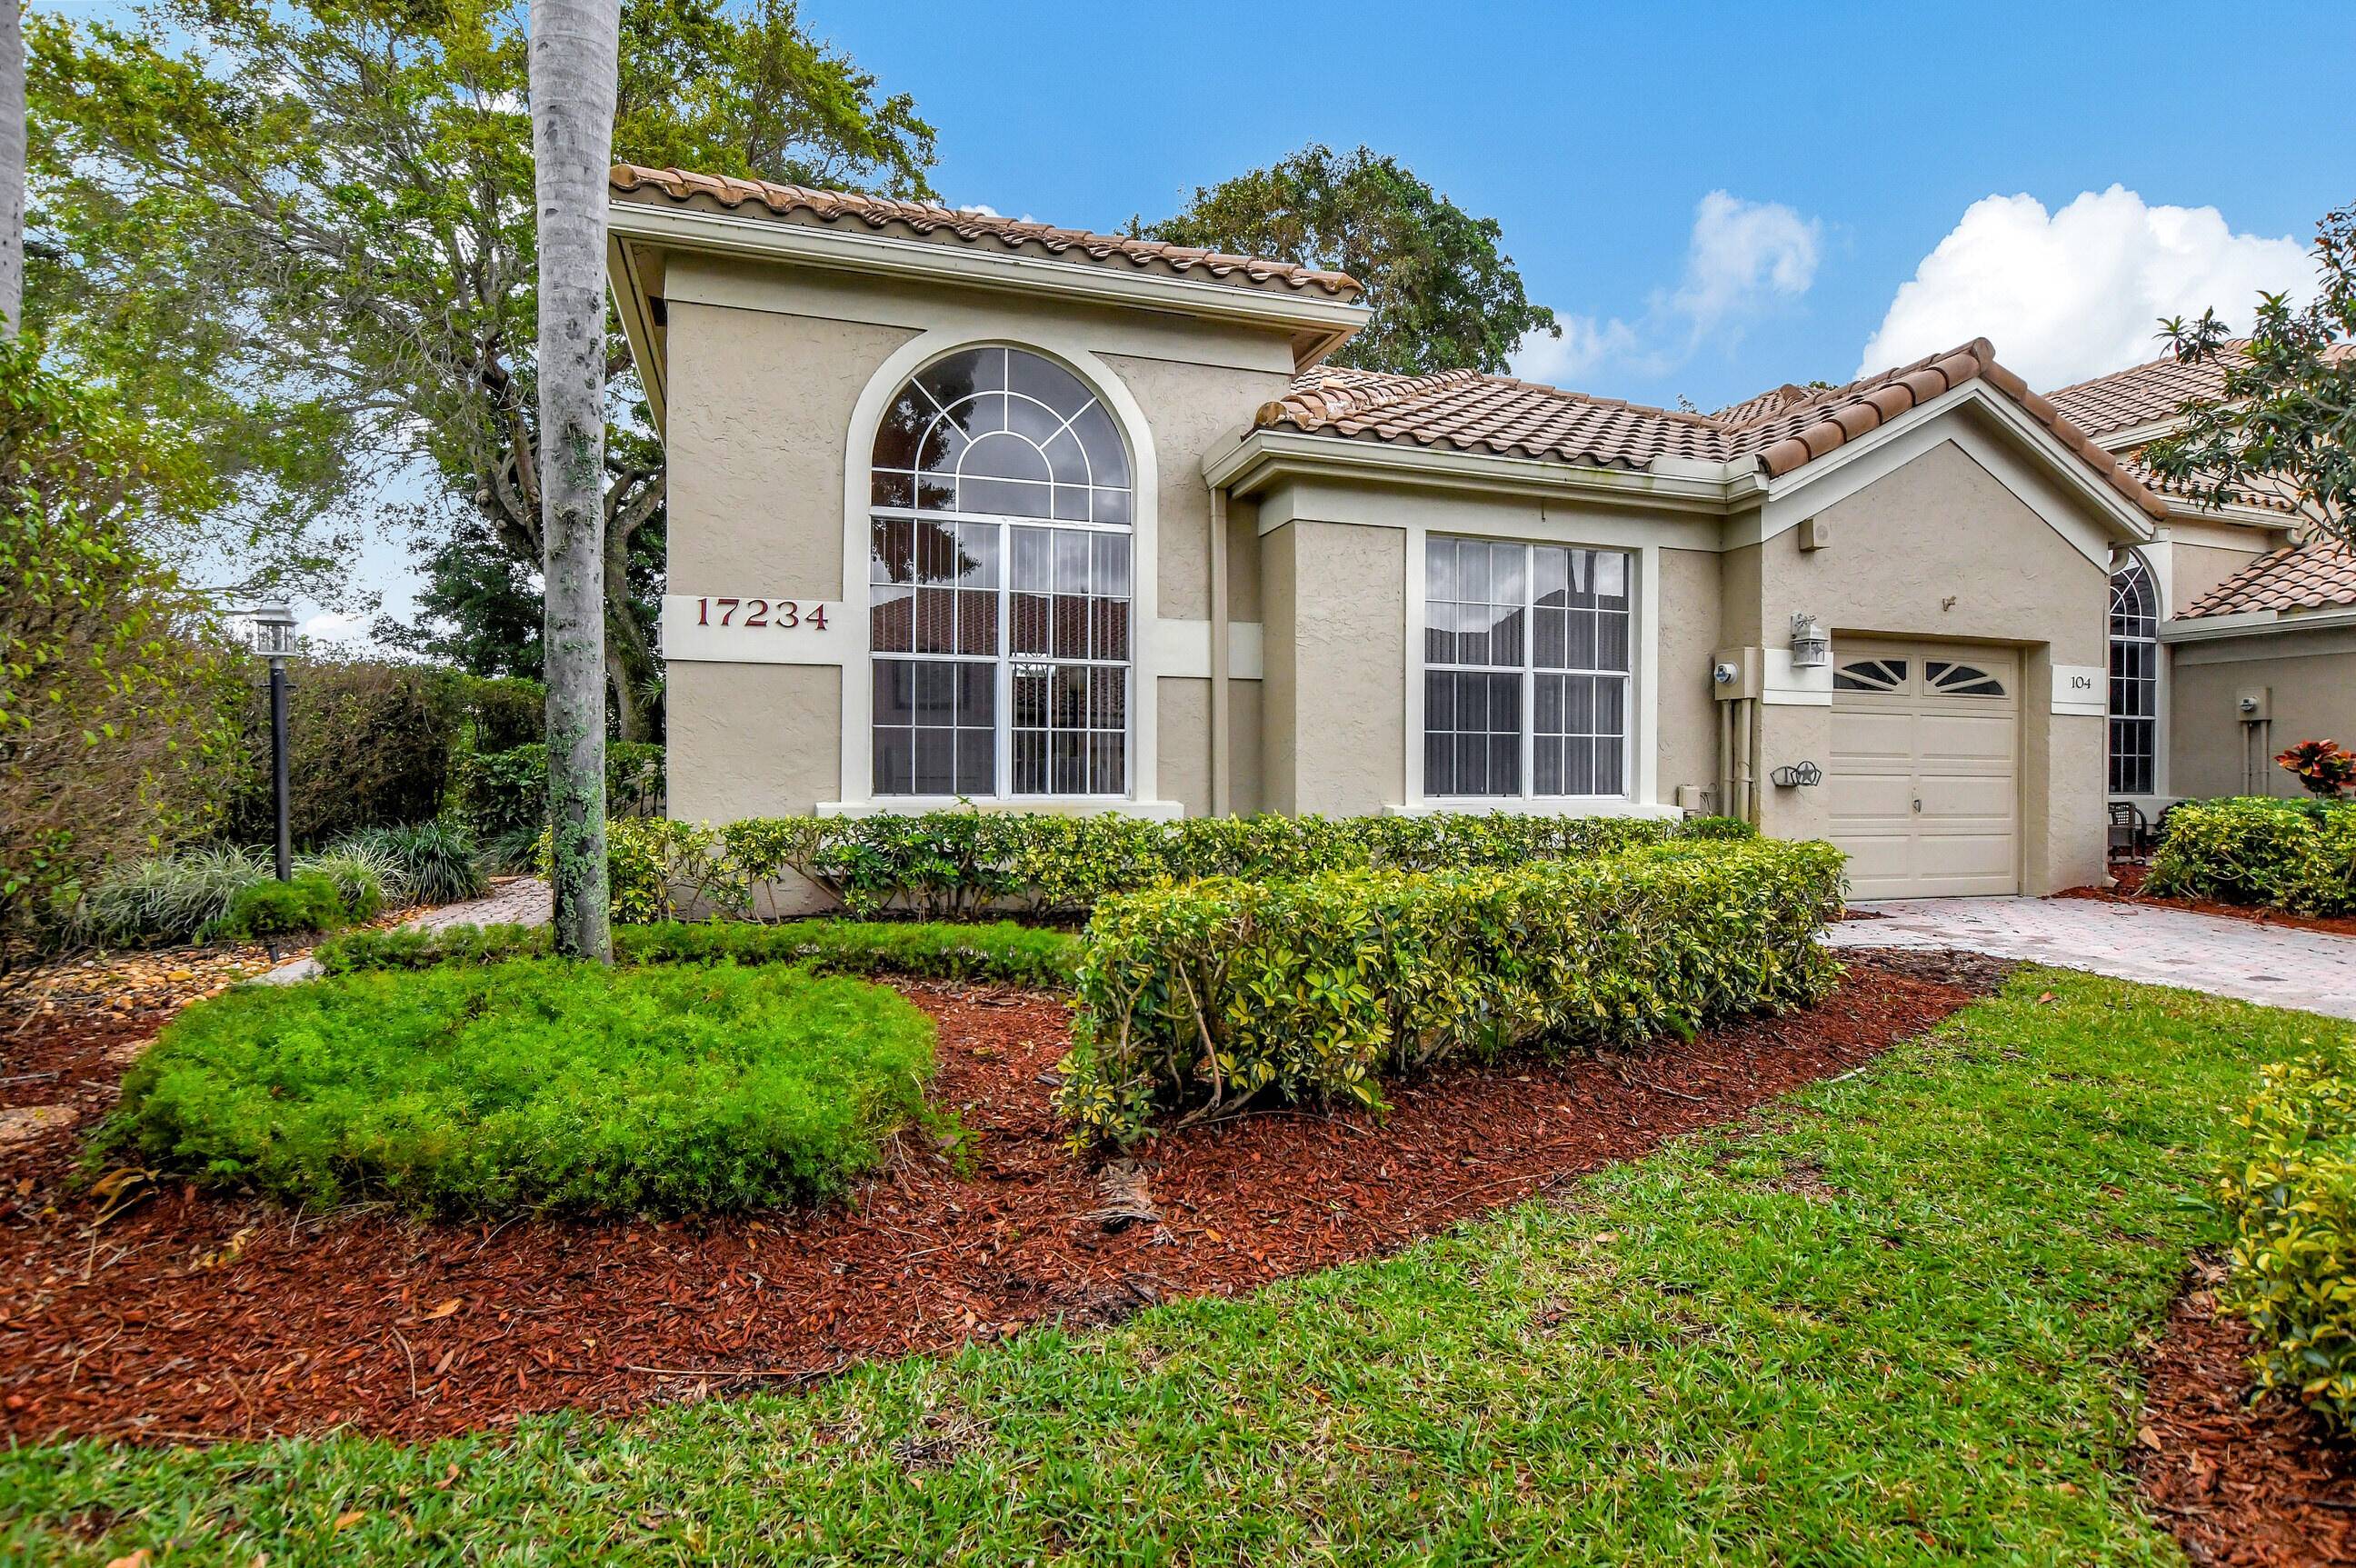 Welcome home to this Desirable Townhouse located in Prestigious Boca Golf and tennis !